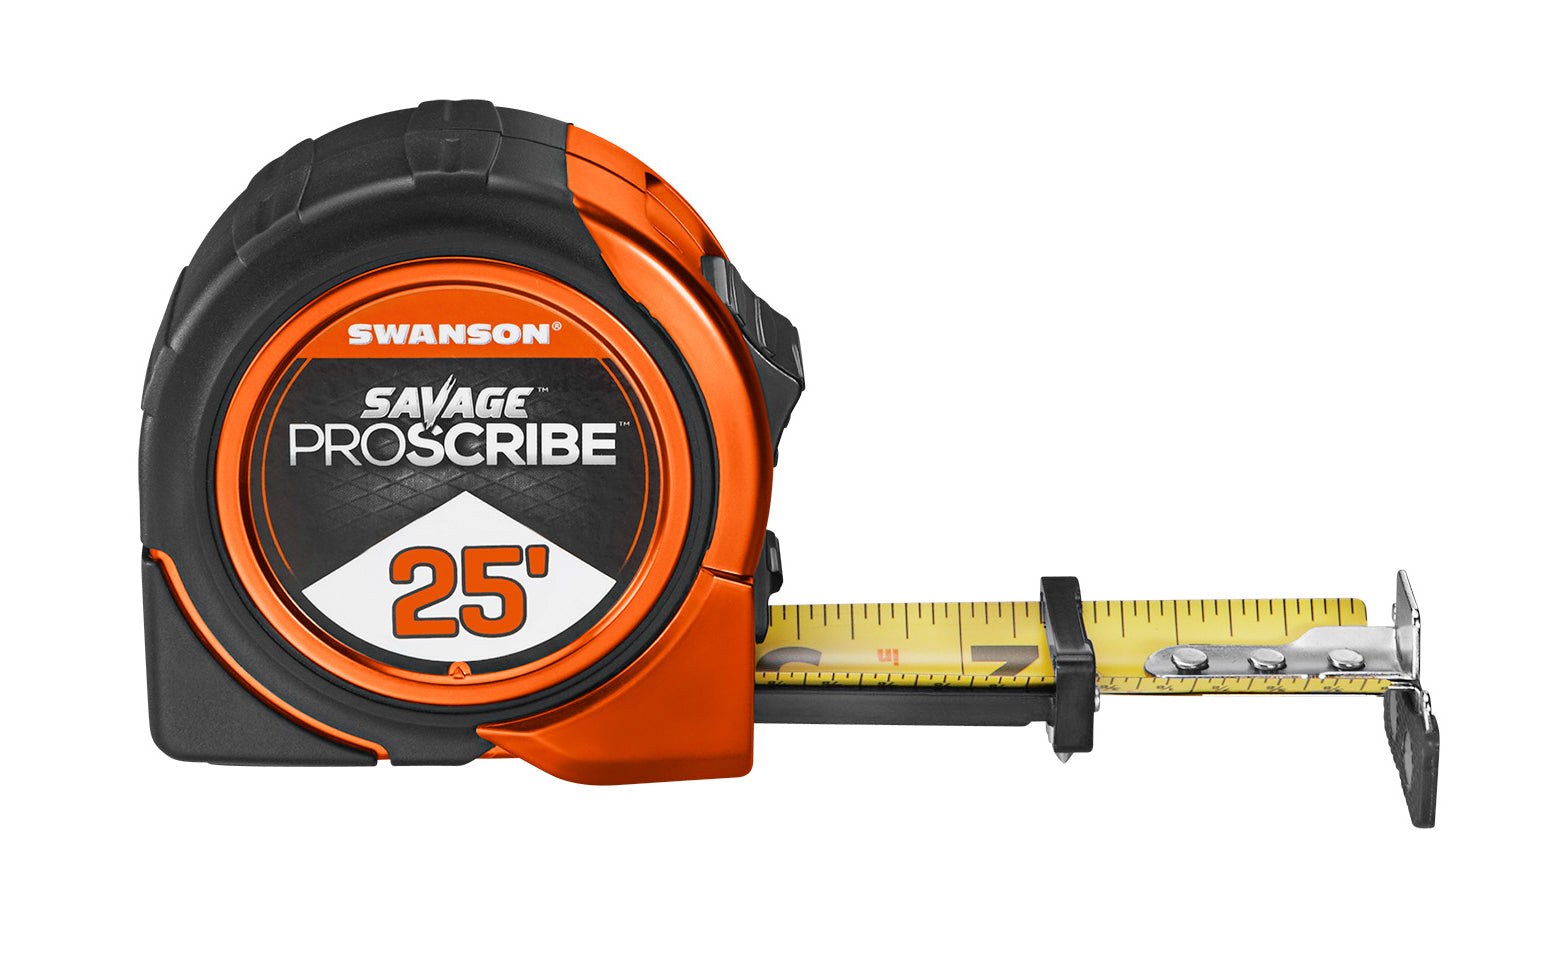 Swanson Savage Proscribe 25' Tape Measure ~ Magnetic Tip - Scribes circles into surfaces with centering pin - Model No. SVPS25M1